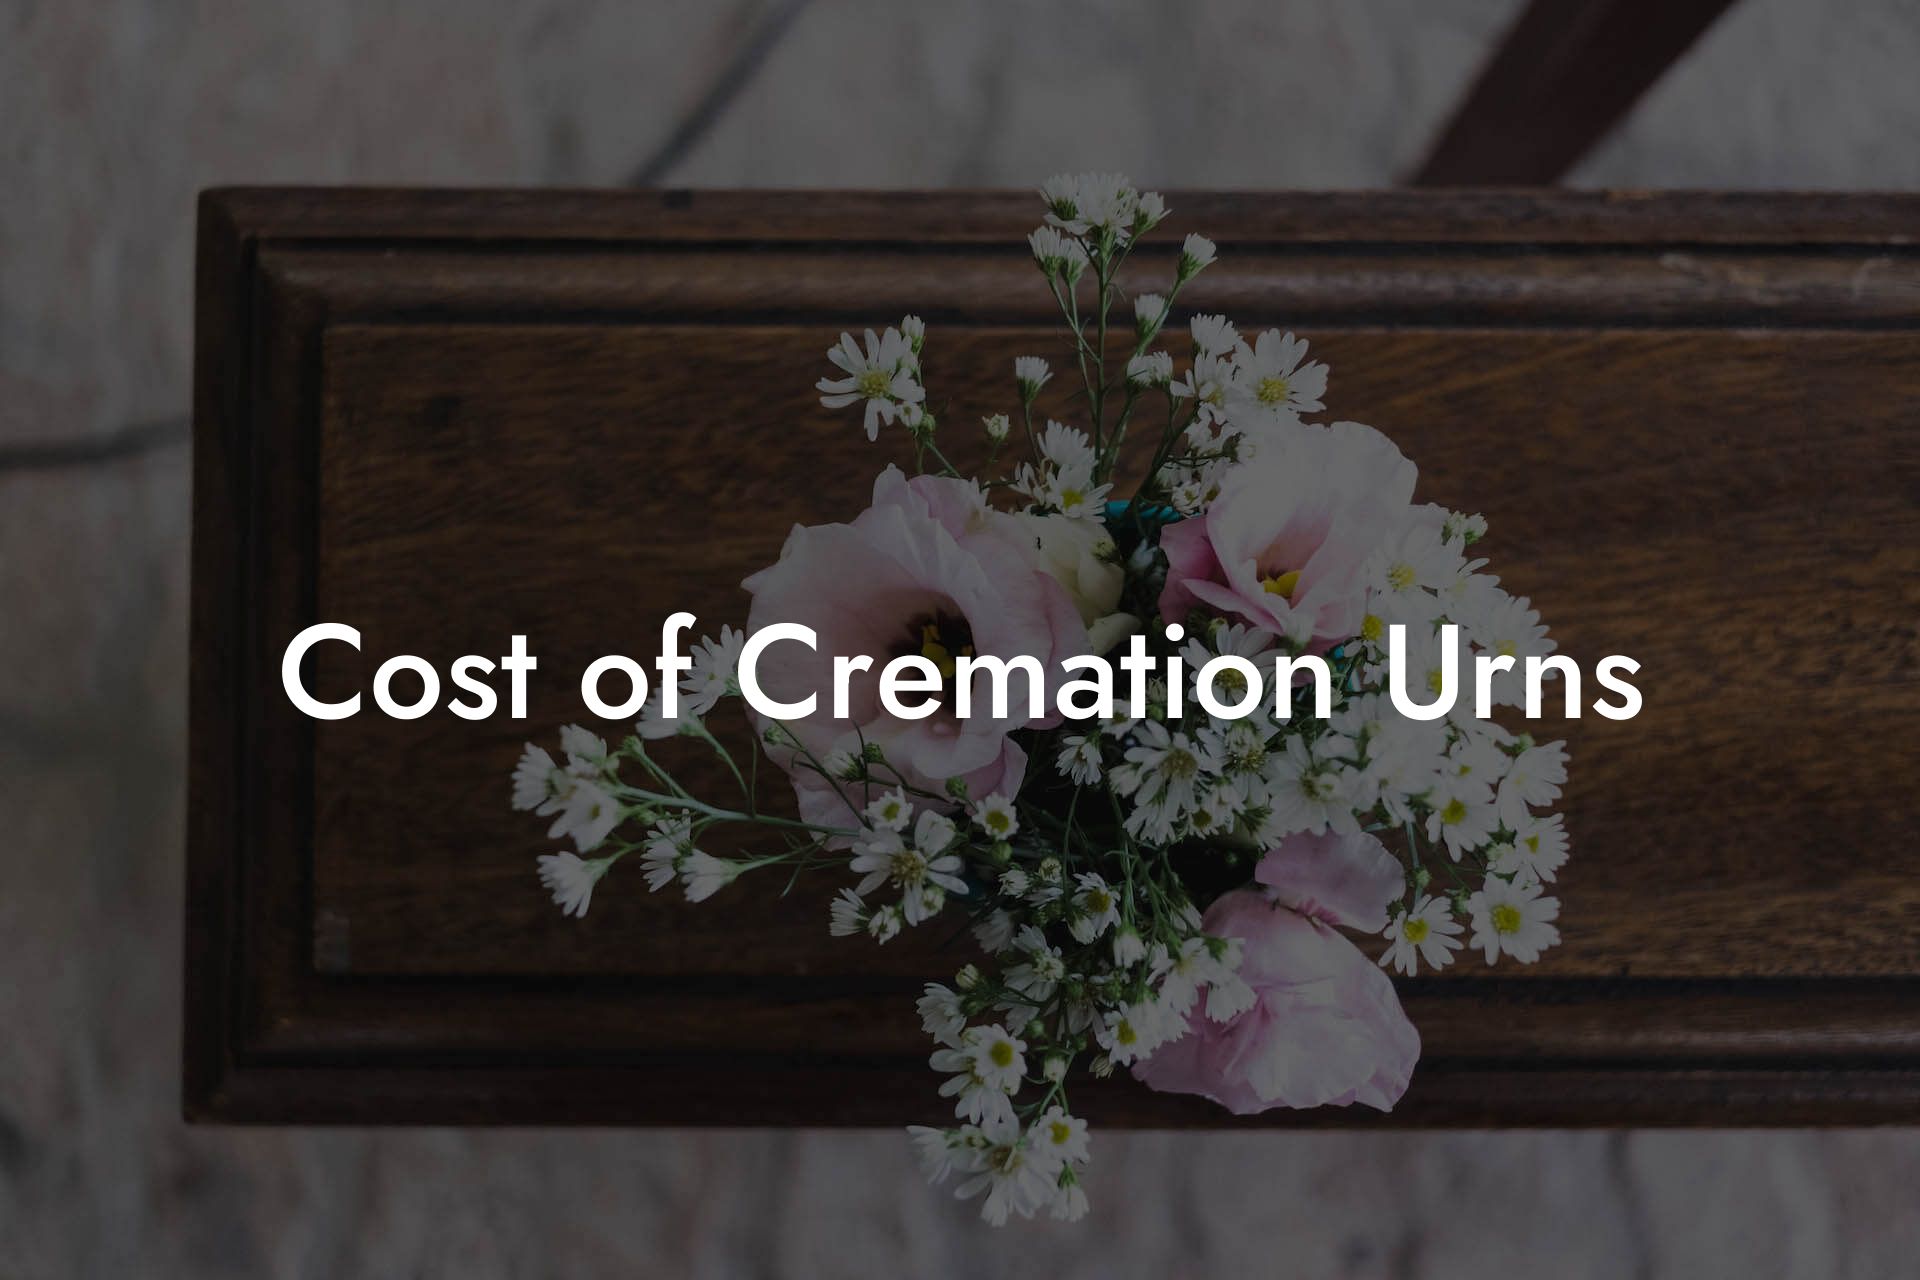 Cost of Cremation Urns